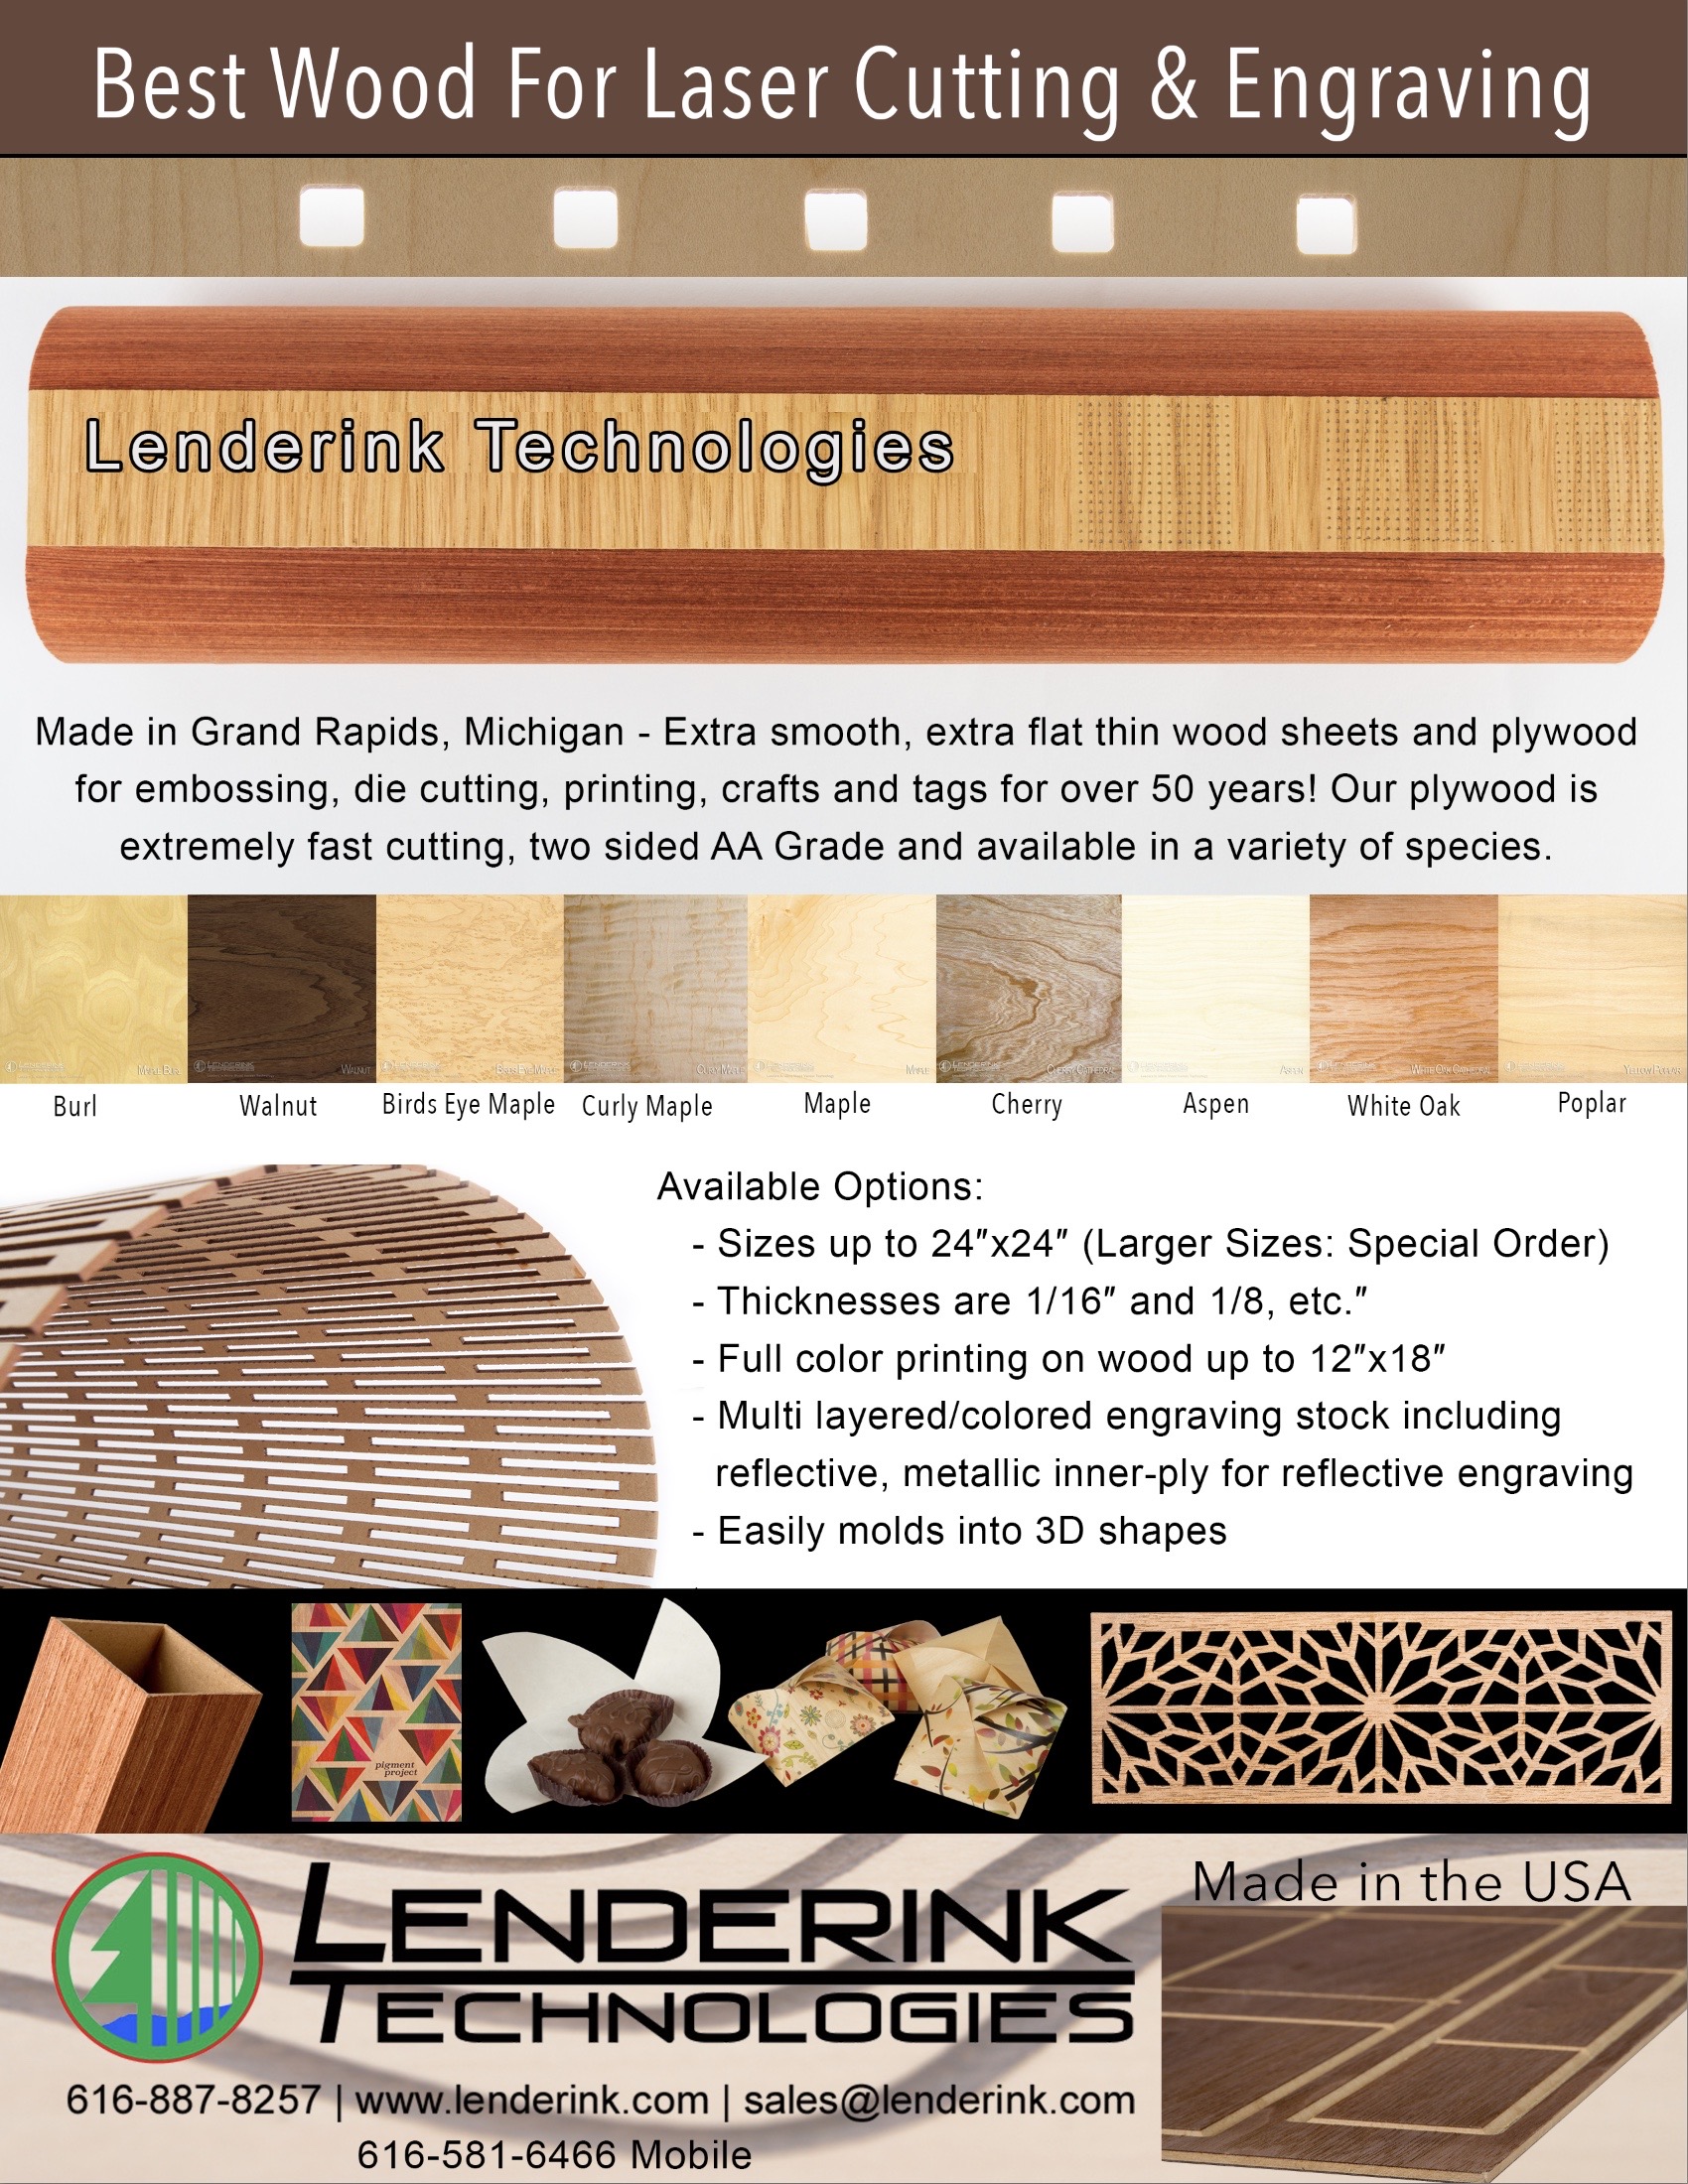 Best wood for laser cutting and engraving